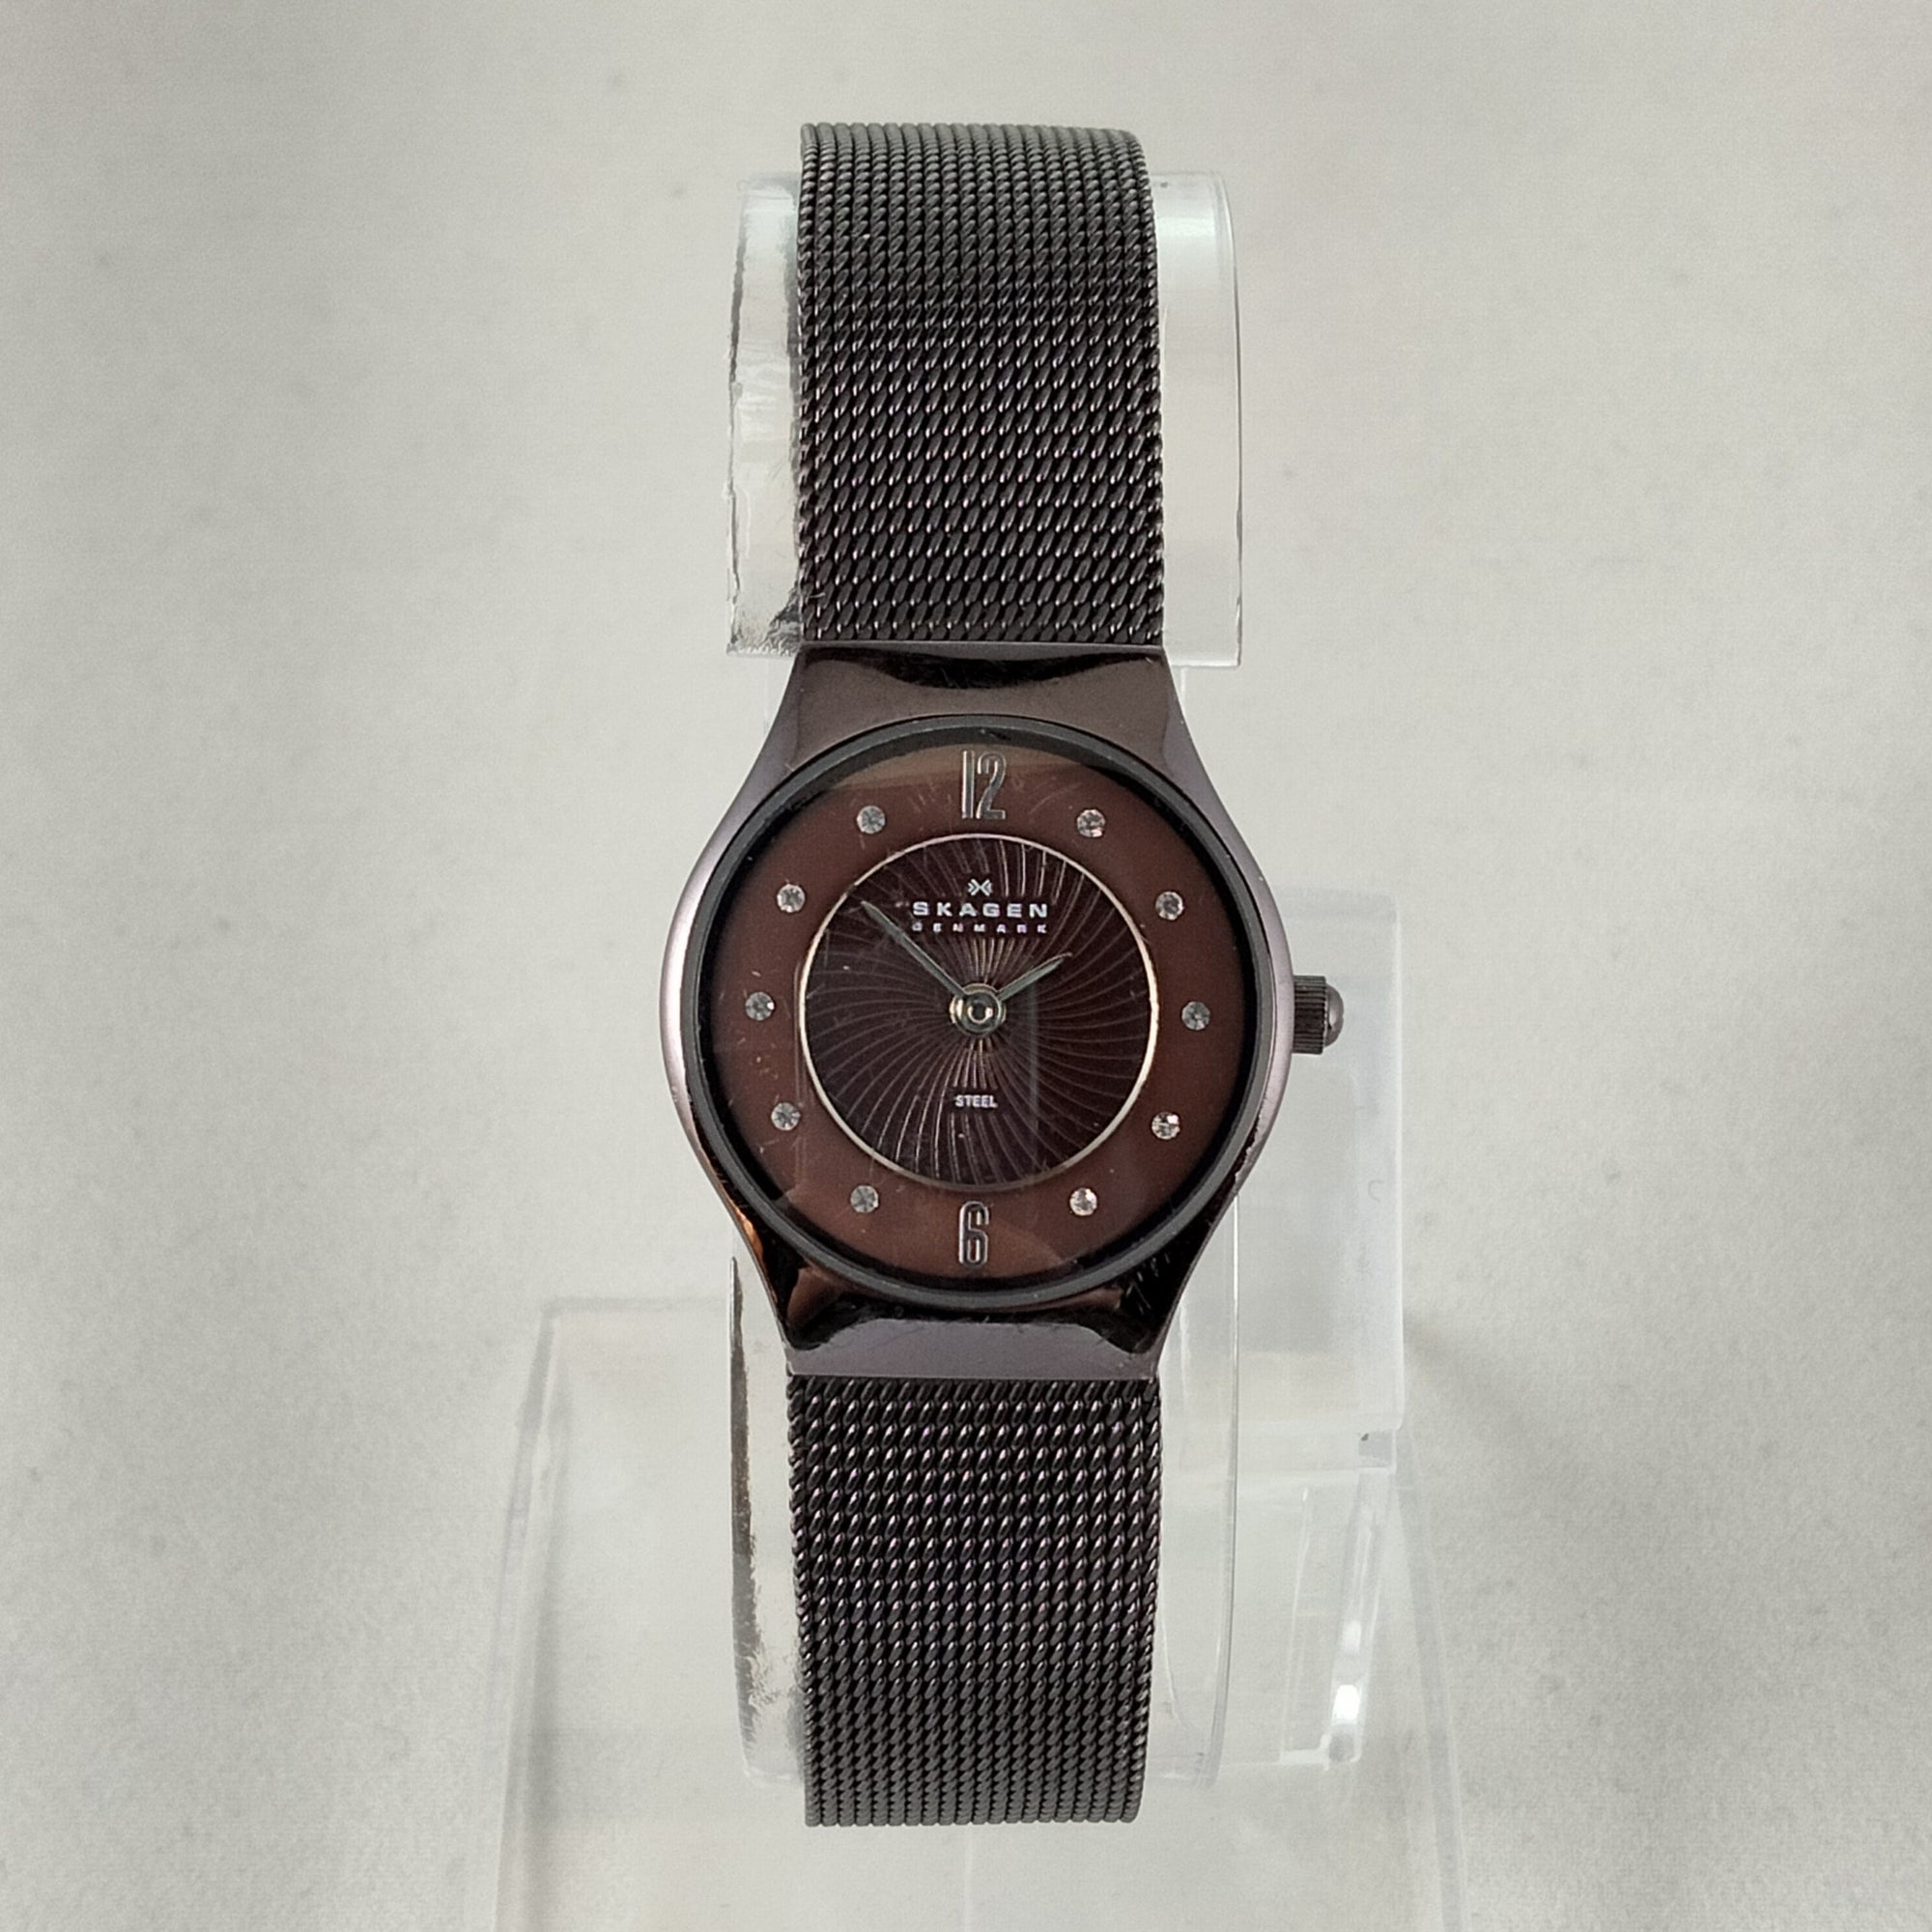 I Like Mikes Mid Century Modern Watches Skagen Women's Stainless Steel Round Watch, Brown Mother of Pearl Dial, Black Mesh Strap